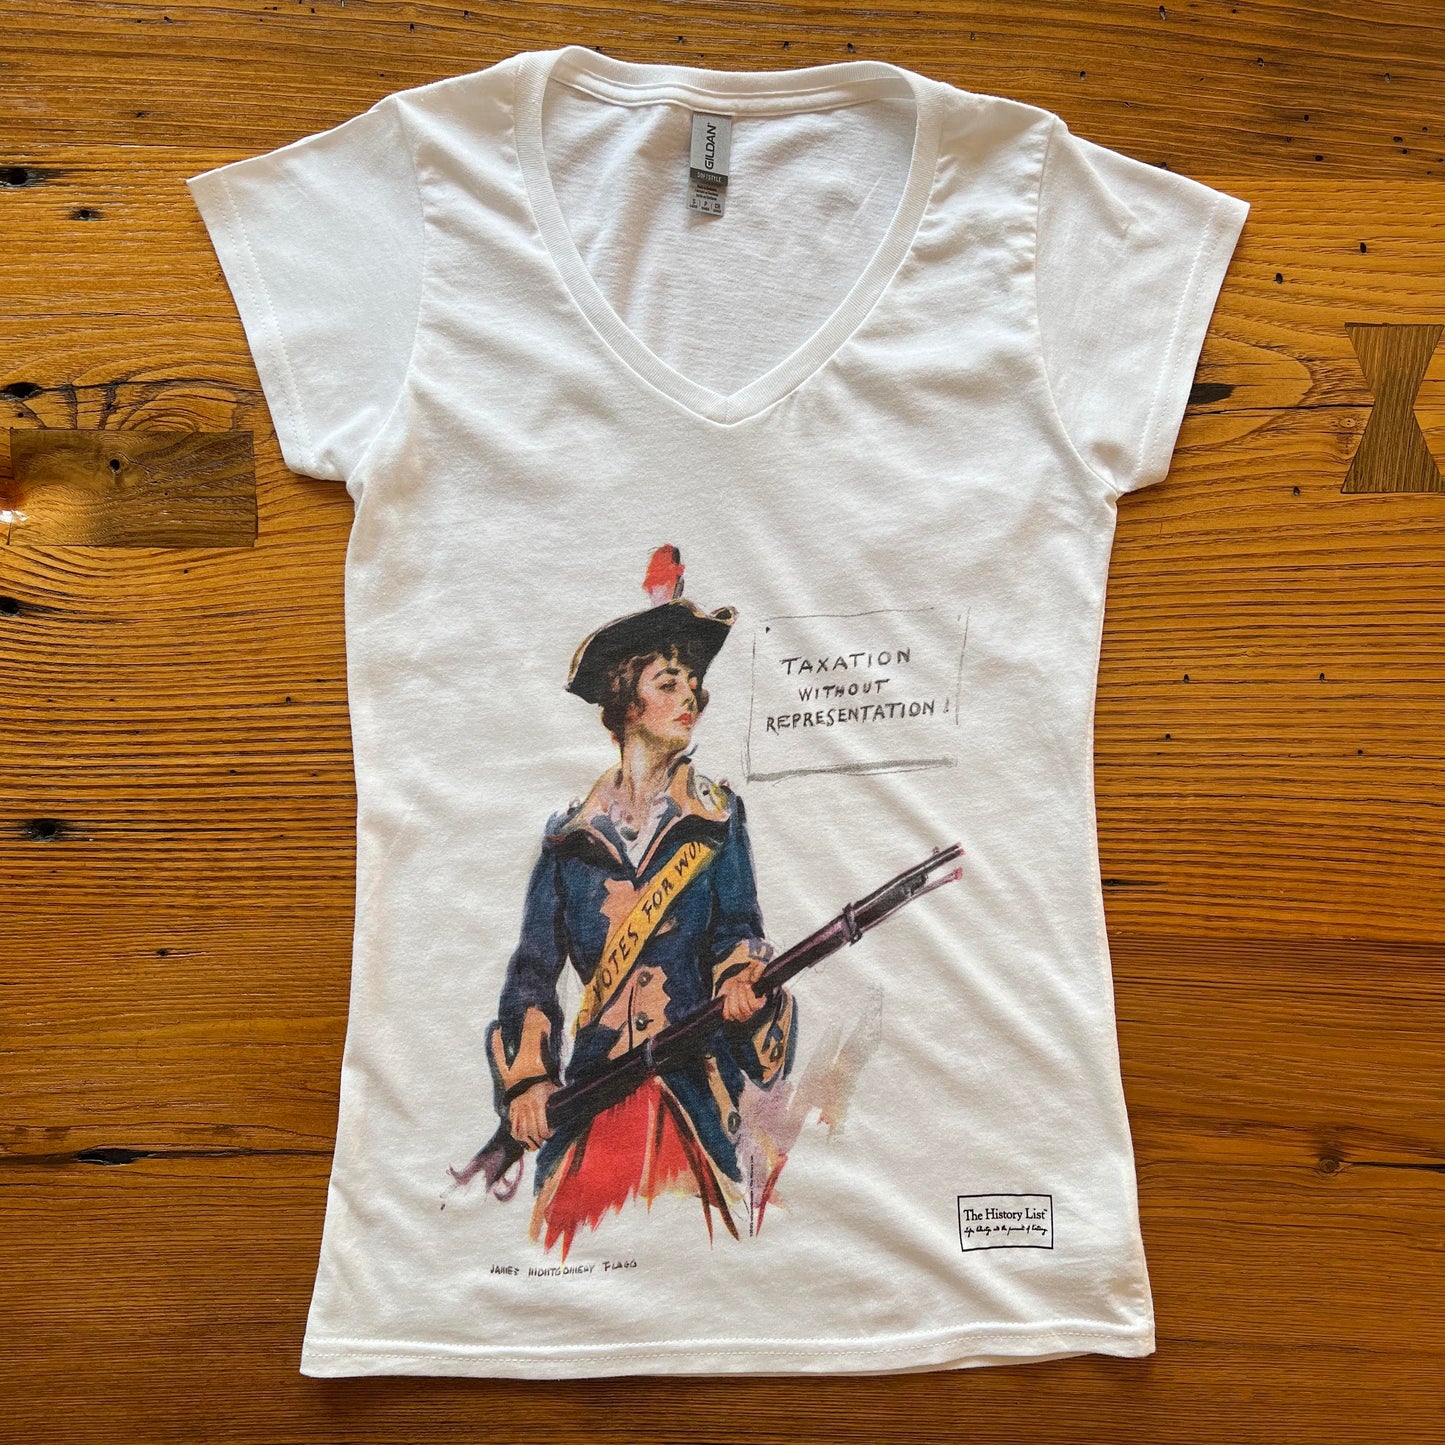 Revolutionary Suffragette Shirt with illustration by James Montgomery Flagg V-neck shirt from The History List store